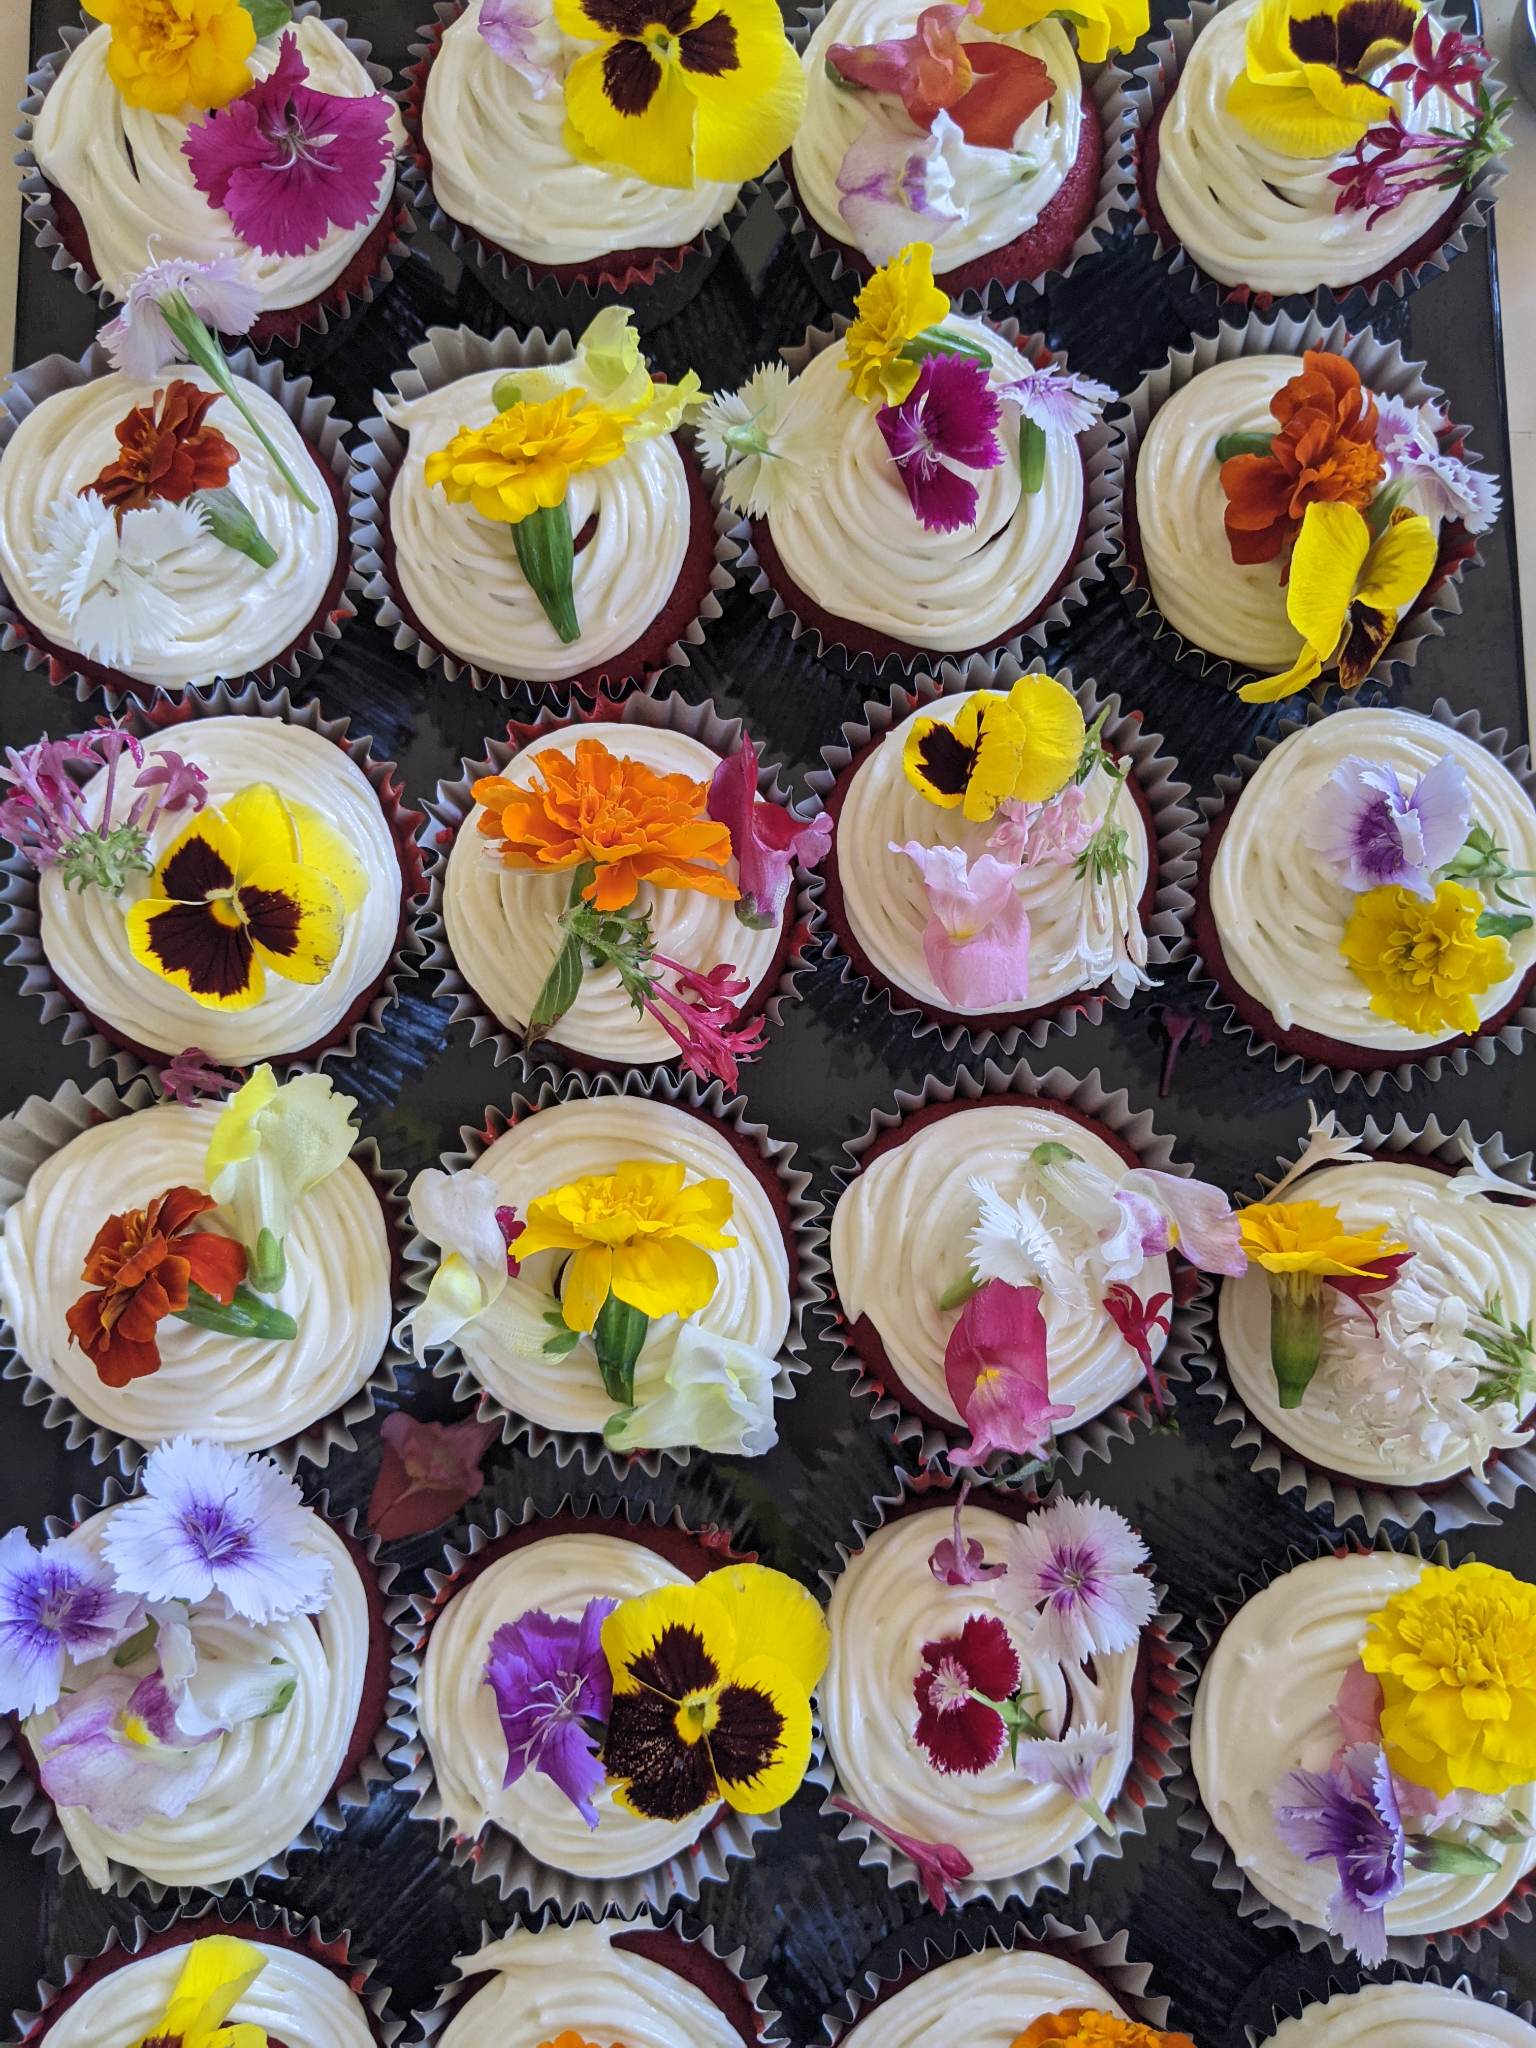 An aerial view of a row of cupcakes with white icing, and brightly coloured edible flowers on top